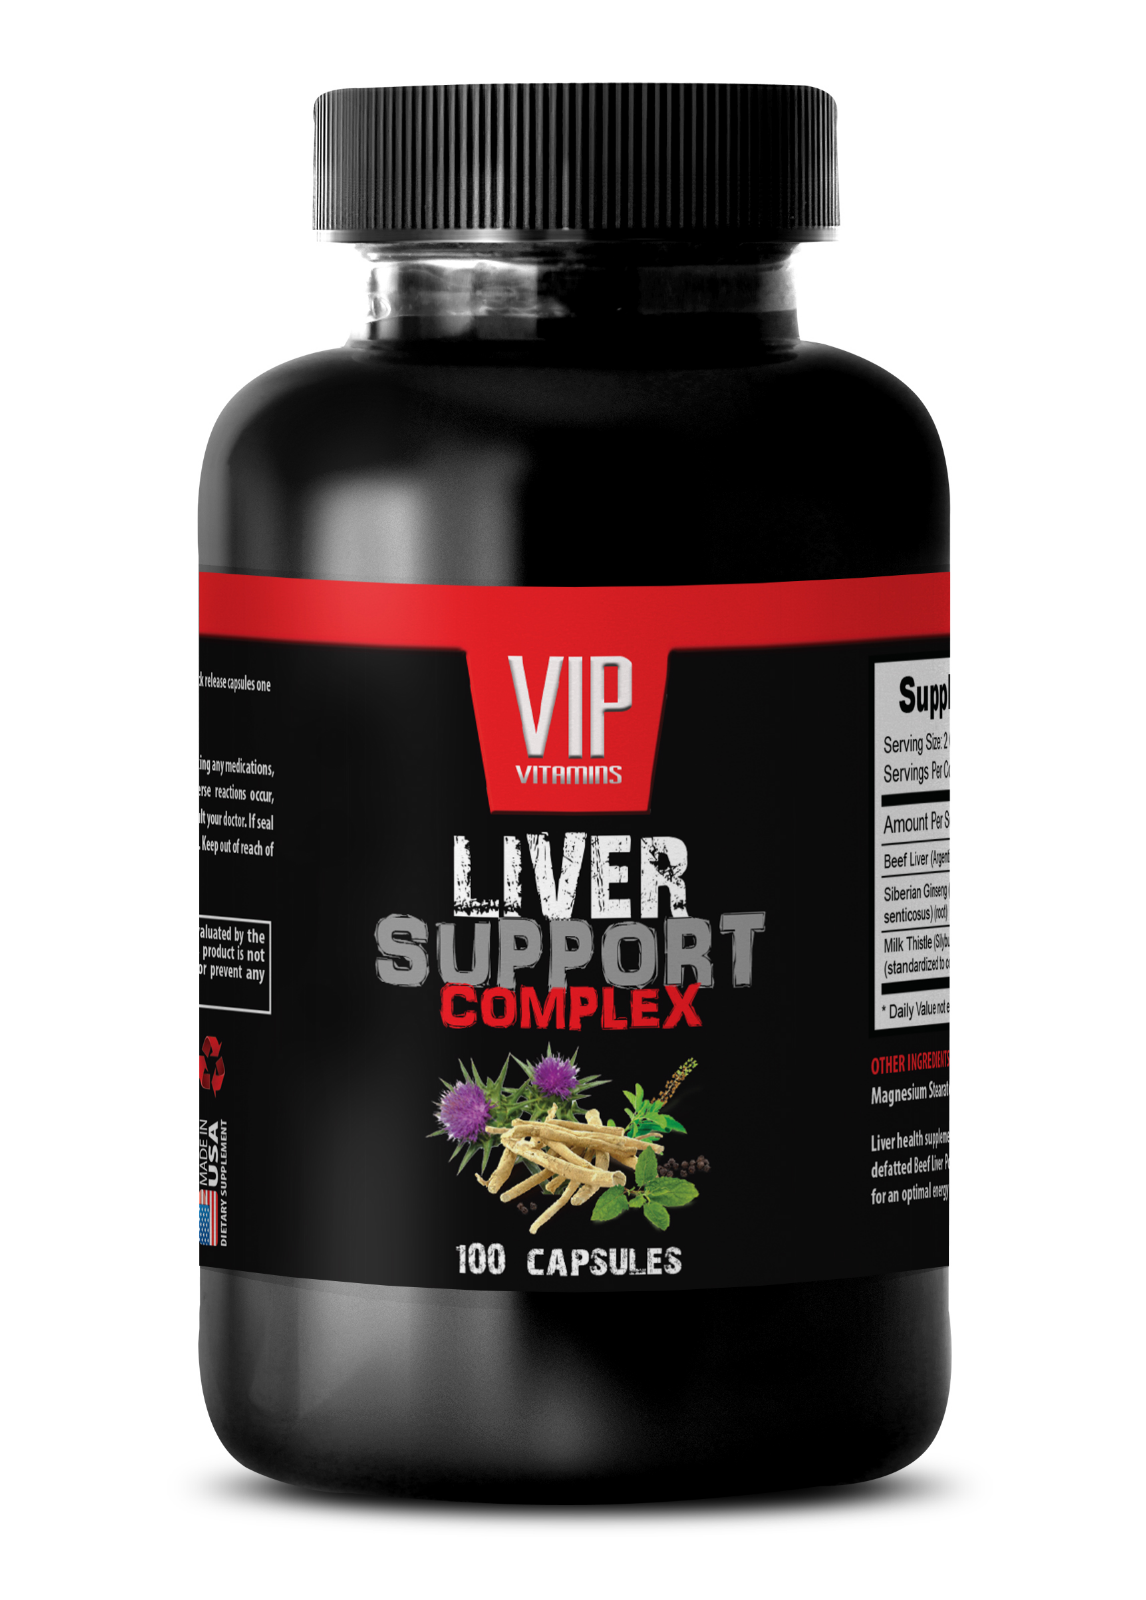 liver detox and cleanse - liver complex 1200mg - ginseng powder - 1 bottle 100